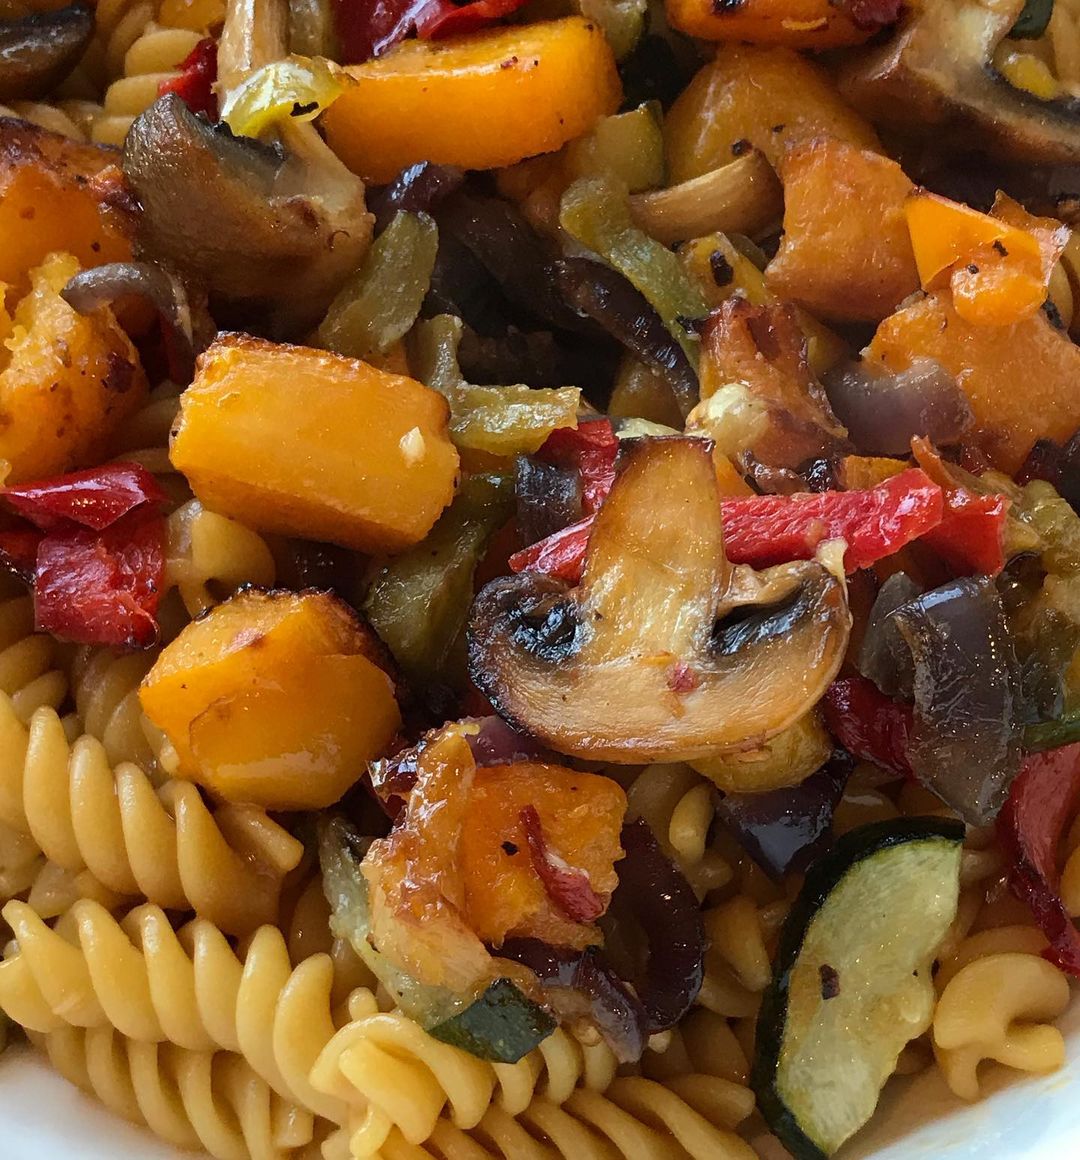 Marmite Pasta with Roasted Veg for Dinner